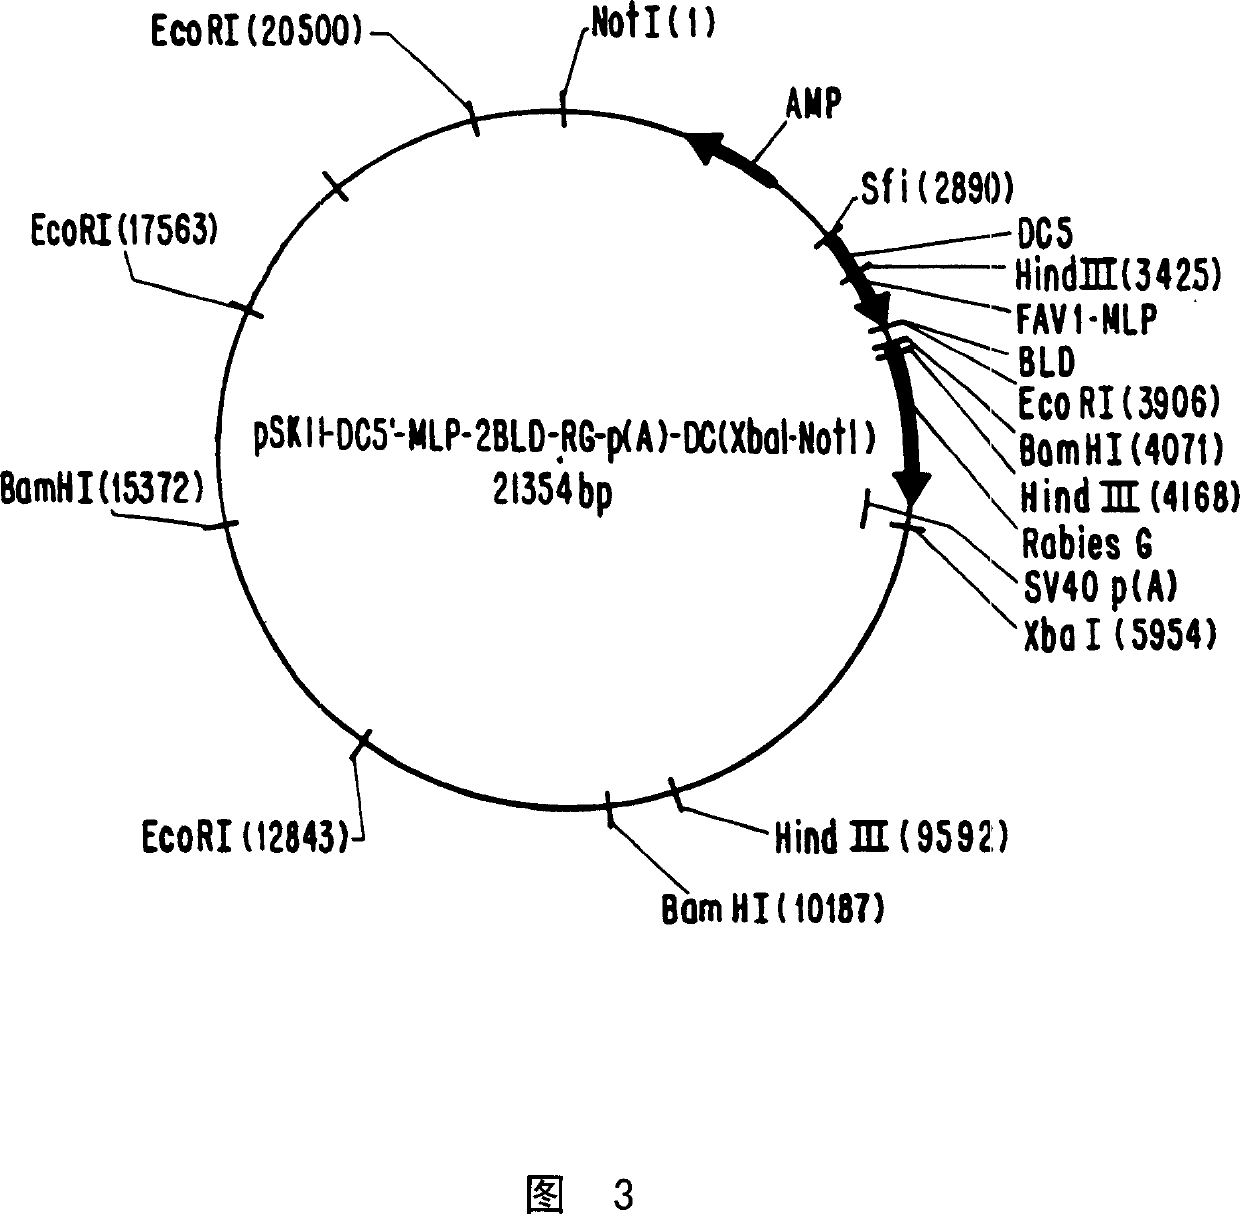 Recombinant eggs and gene cloning and expression vectors based on avian adenoviruses